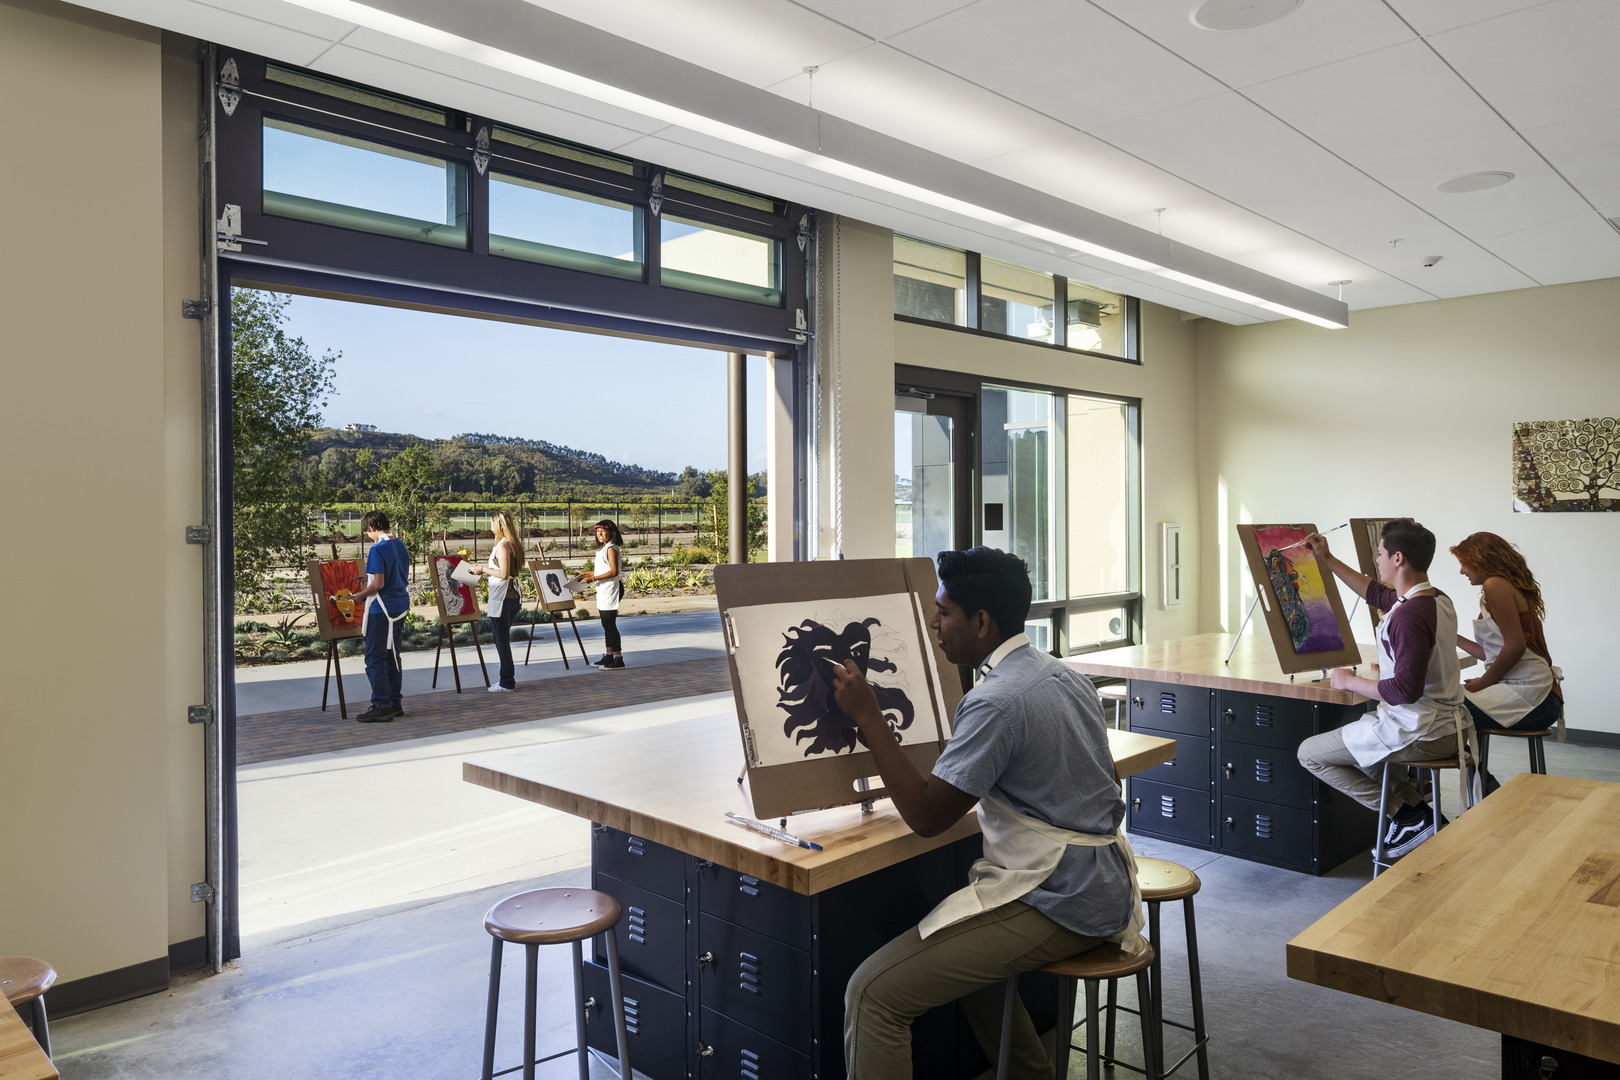 Architects can design all types of classrooms that employ smart building solutions.